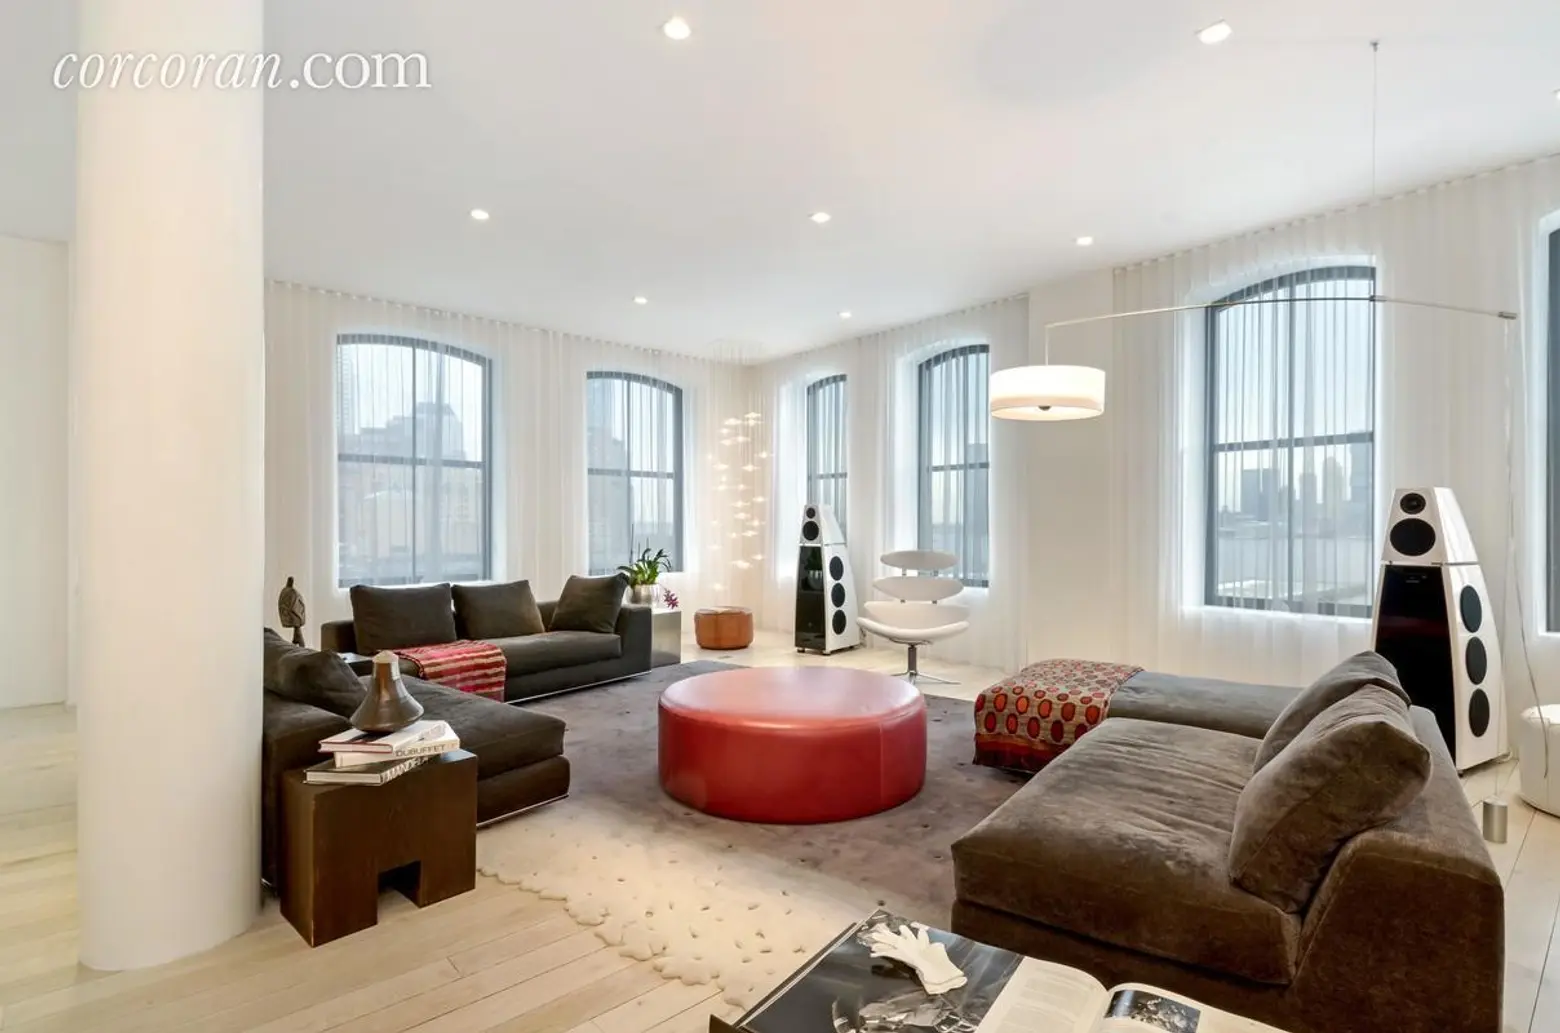 Music exec Sylvia Rhone looks to unload her Tribeca condo for $6.695M ...